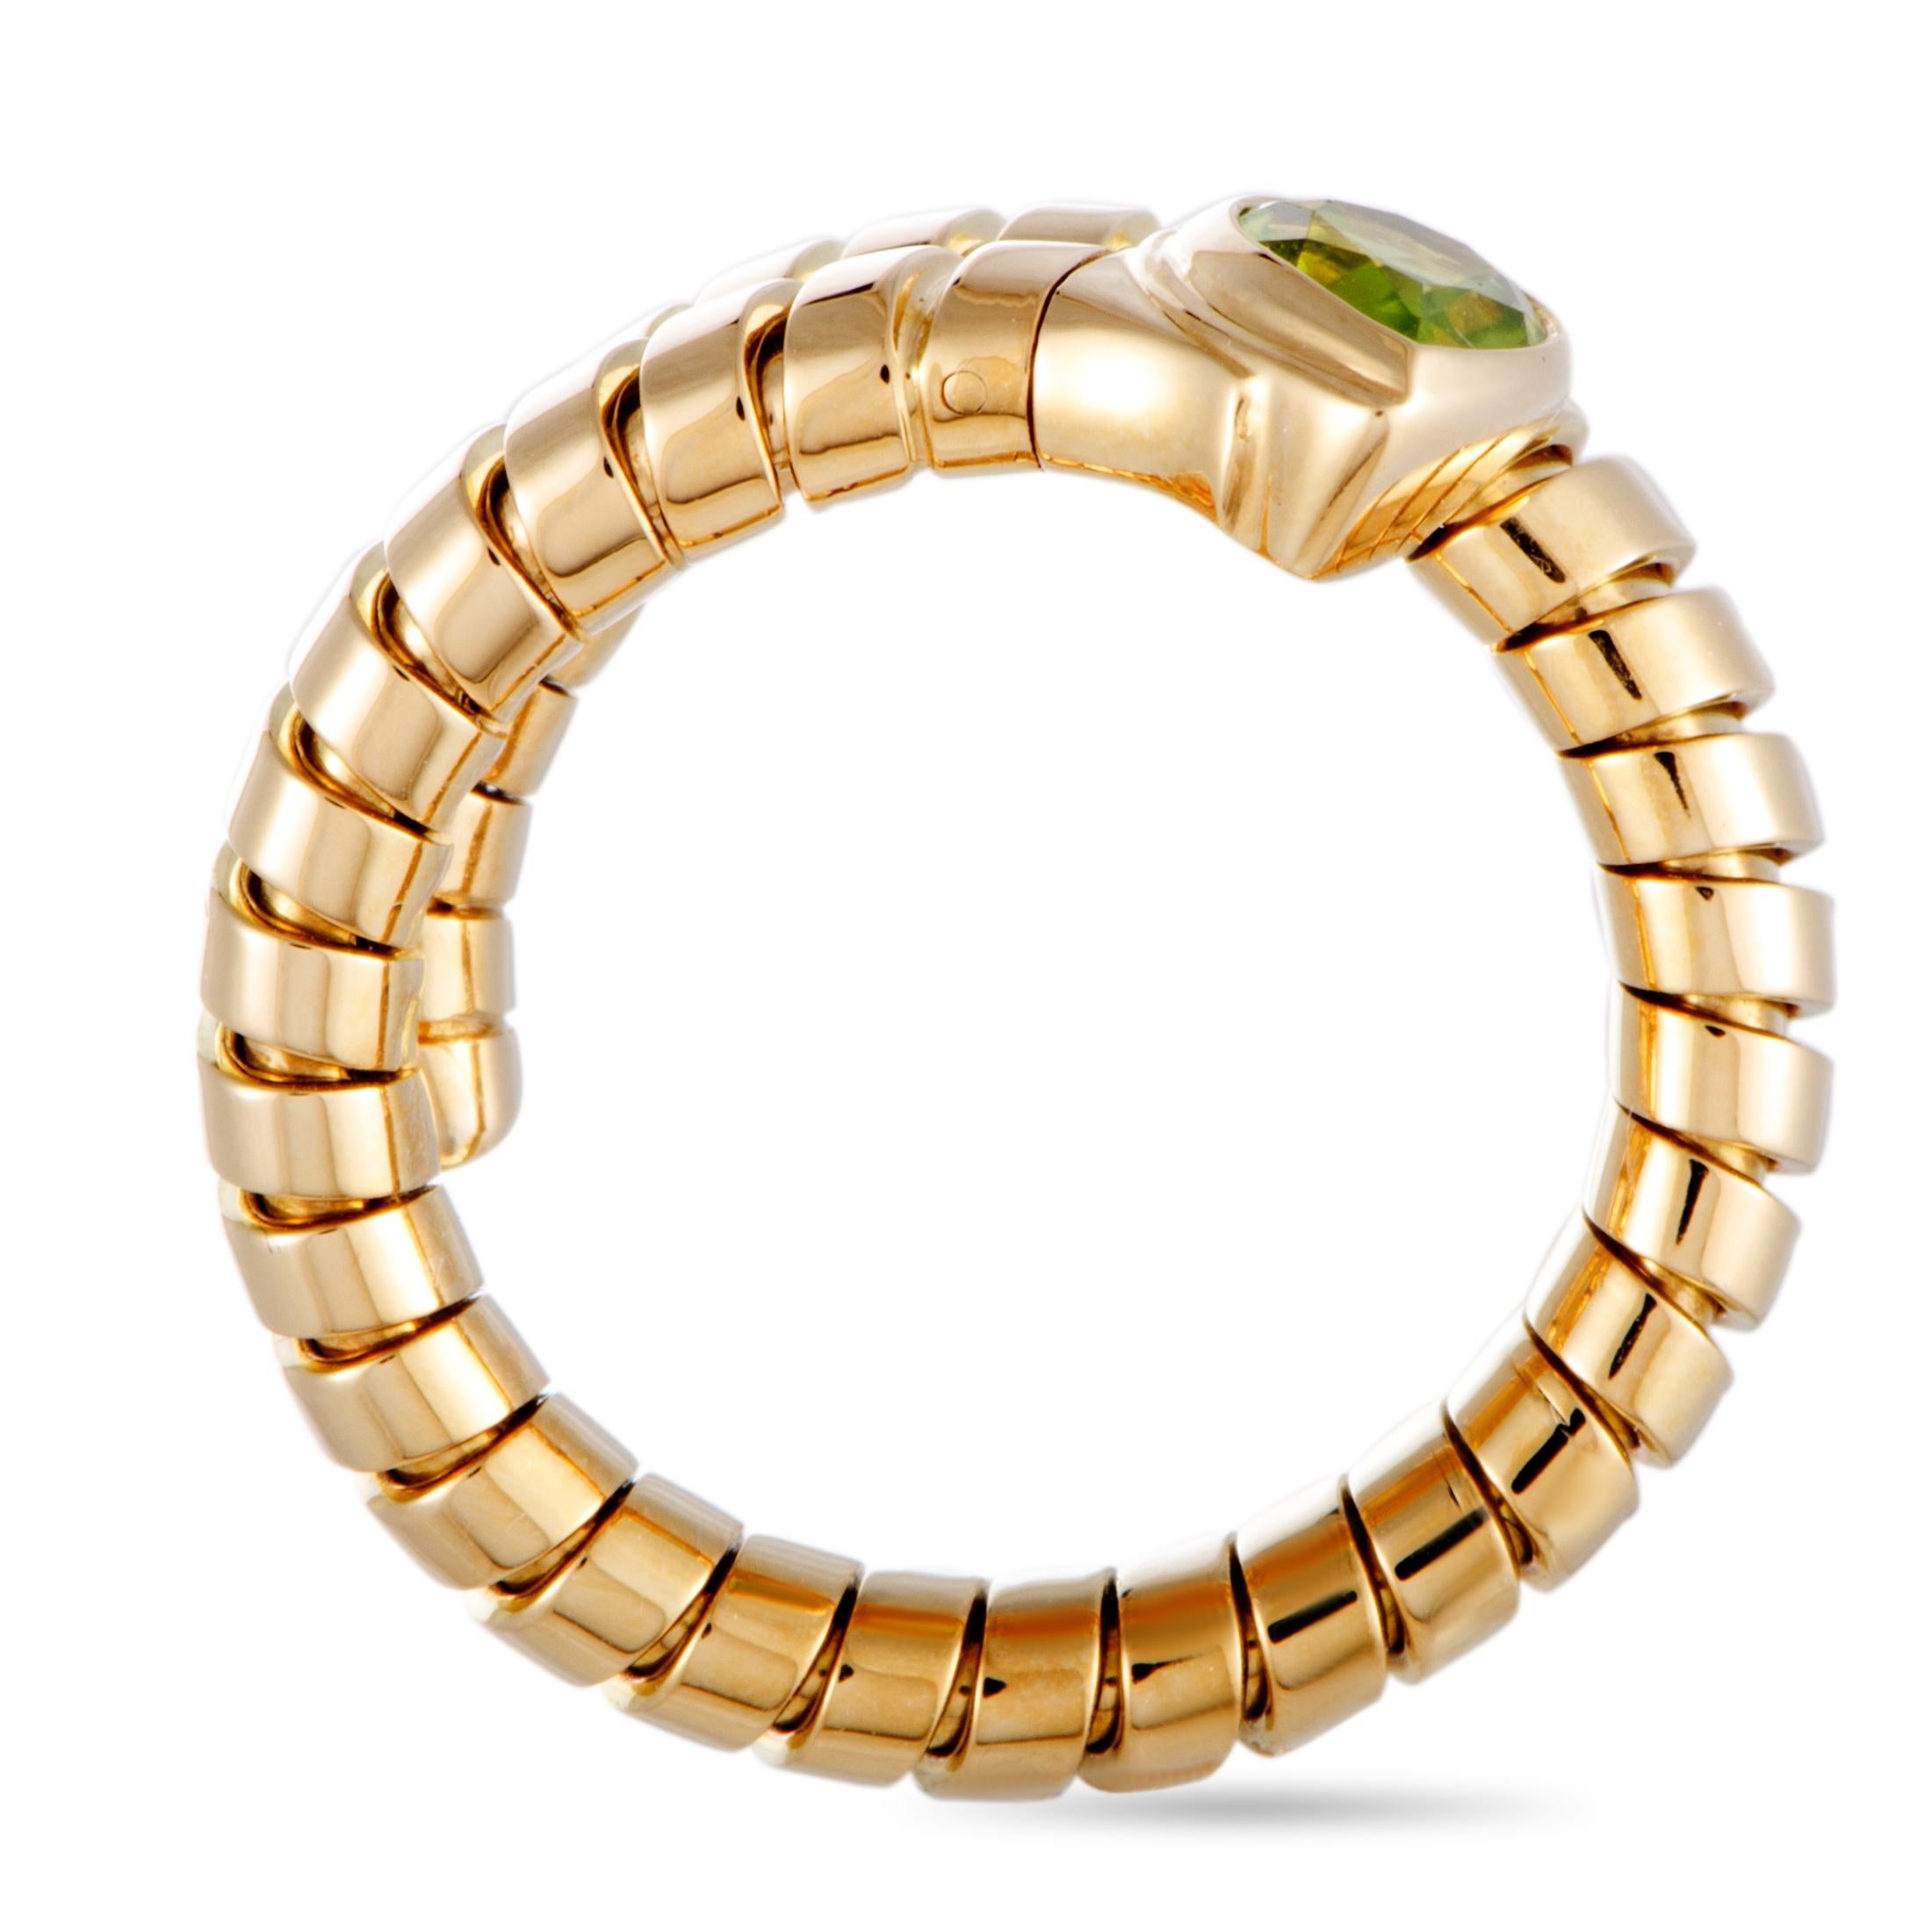 This Bvlgari ring is made of 18K yellow gold and set with a peridot. The ring weighs 9.4 grams, boasting band thickness of 9 mm and top height of 5 mm, while top dimensions measure 12 by 15 mm.

Offered in estate condition, this jewelry piece